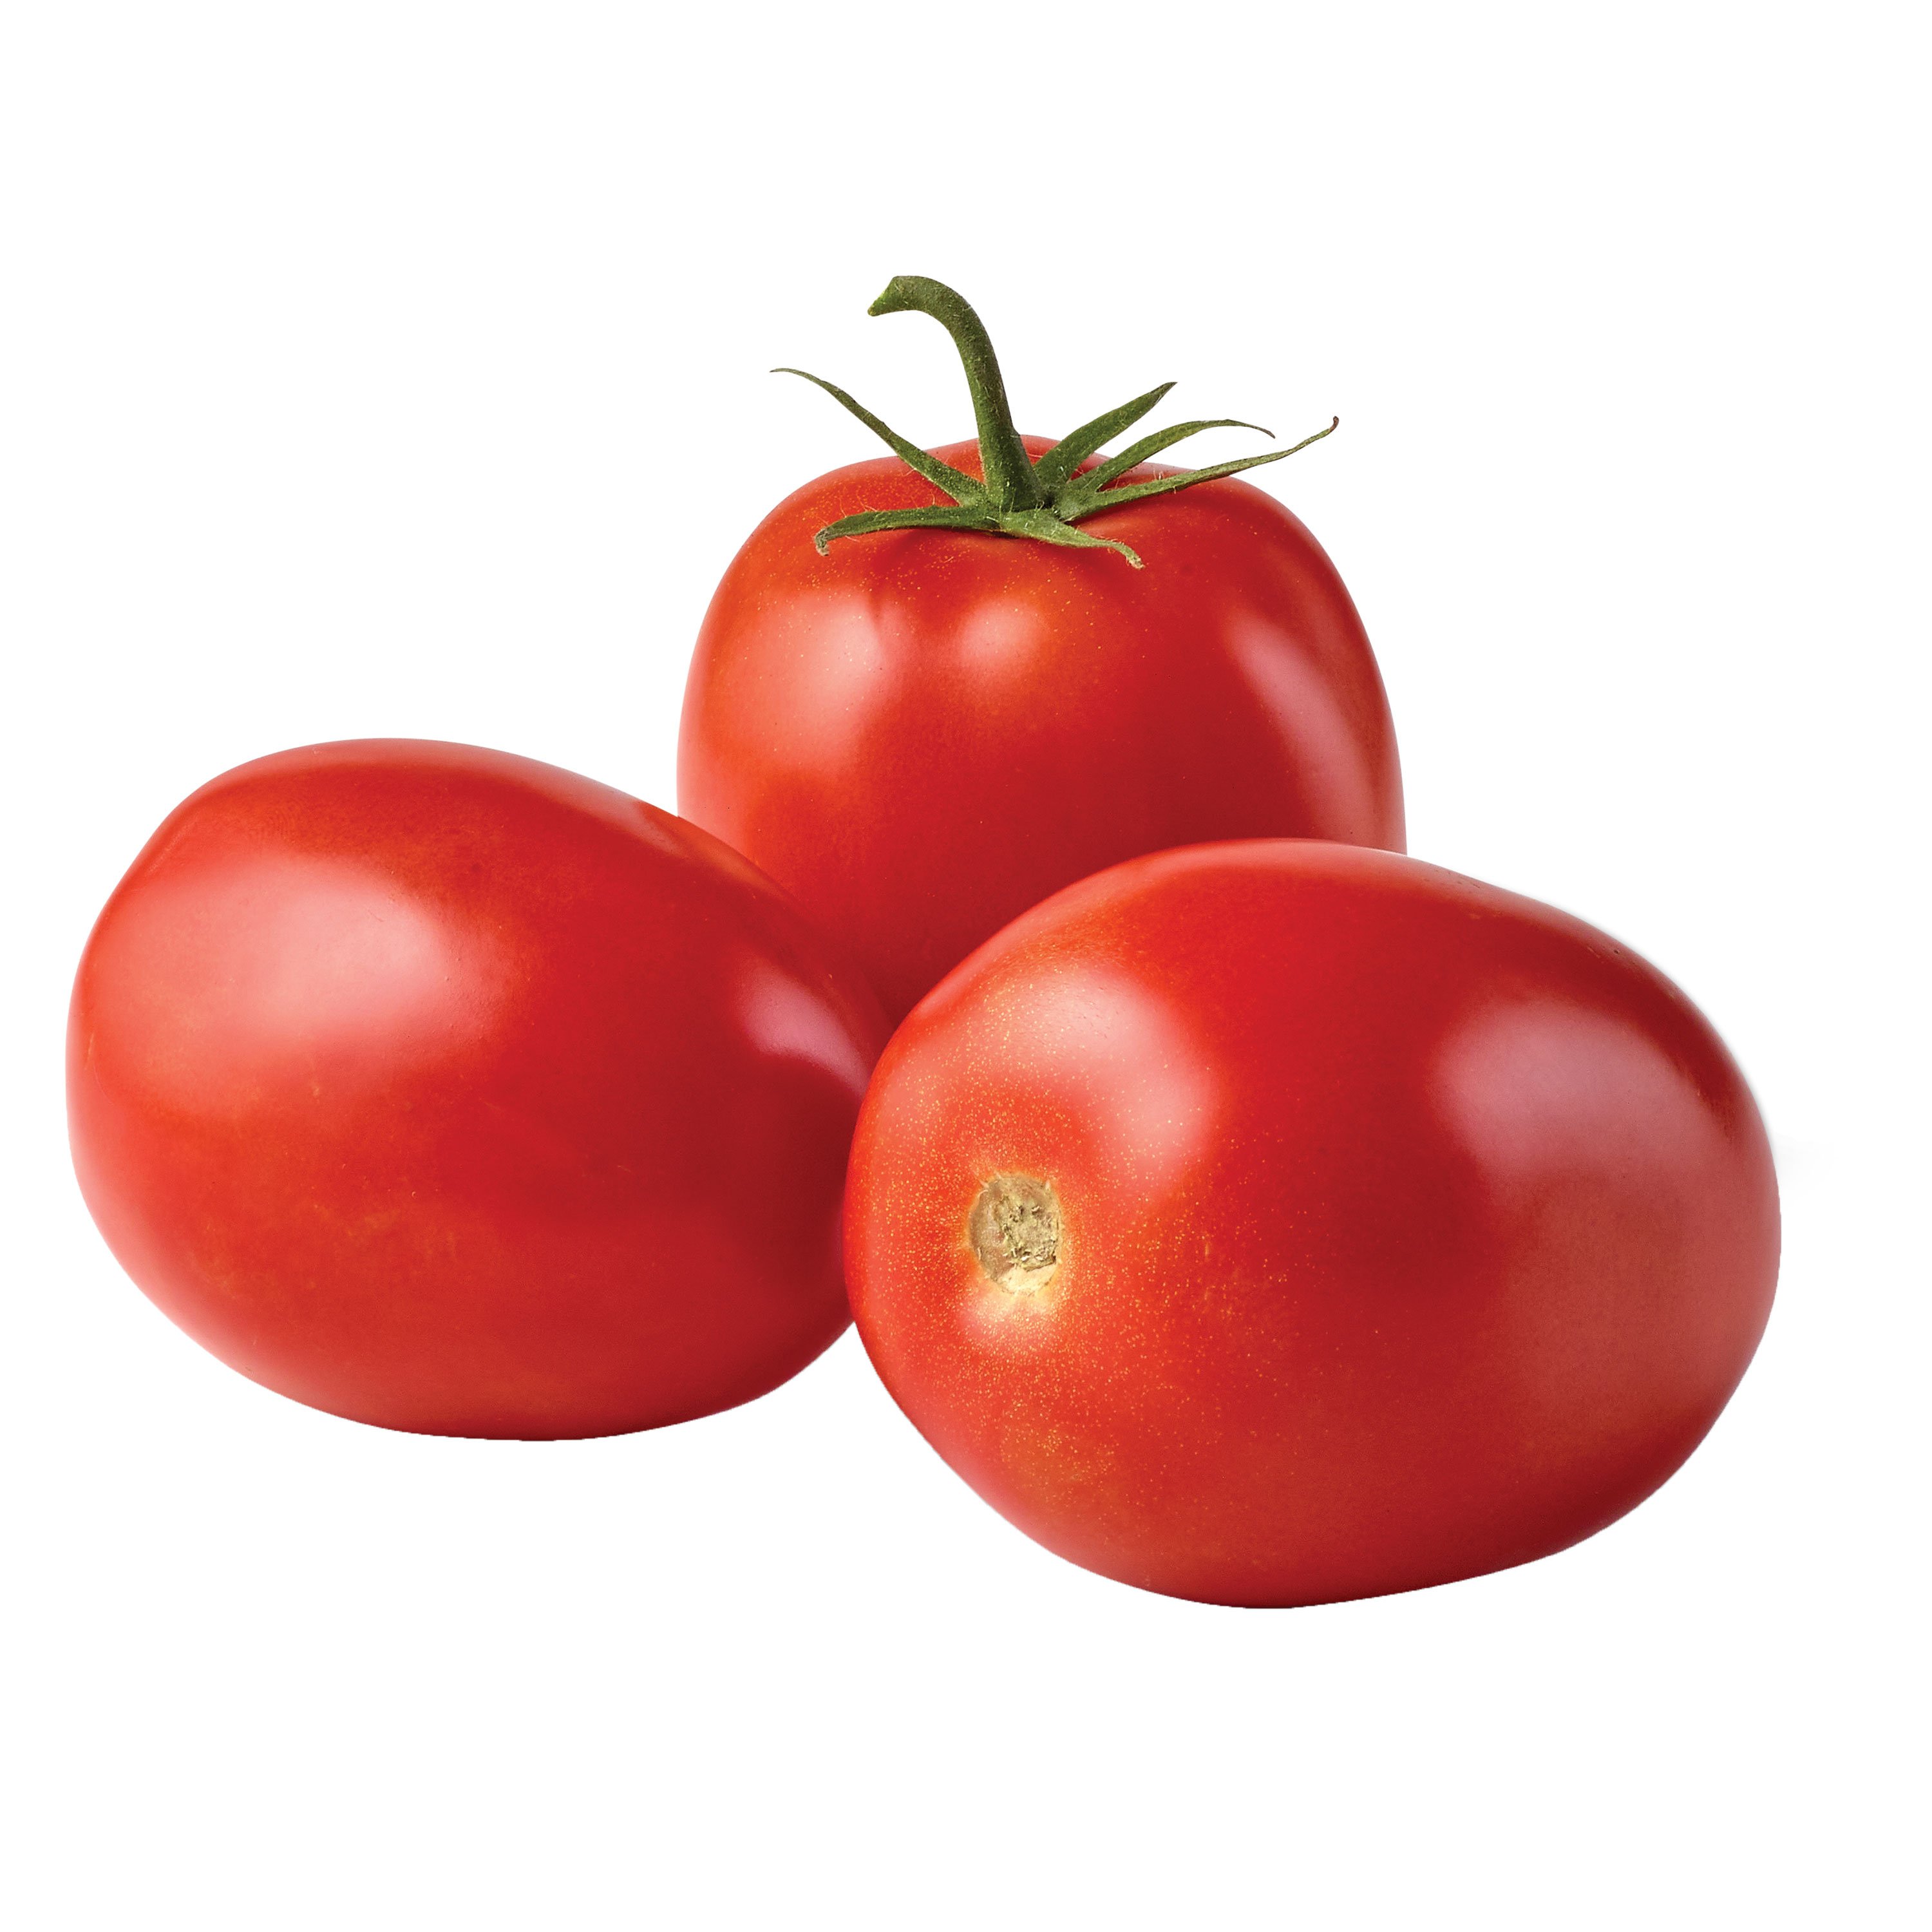 III. Tips for Selecting the Best Roma Tomatoes